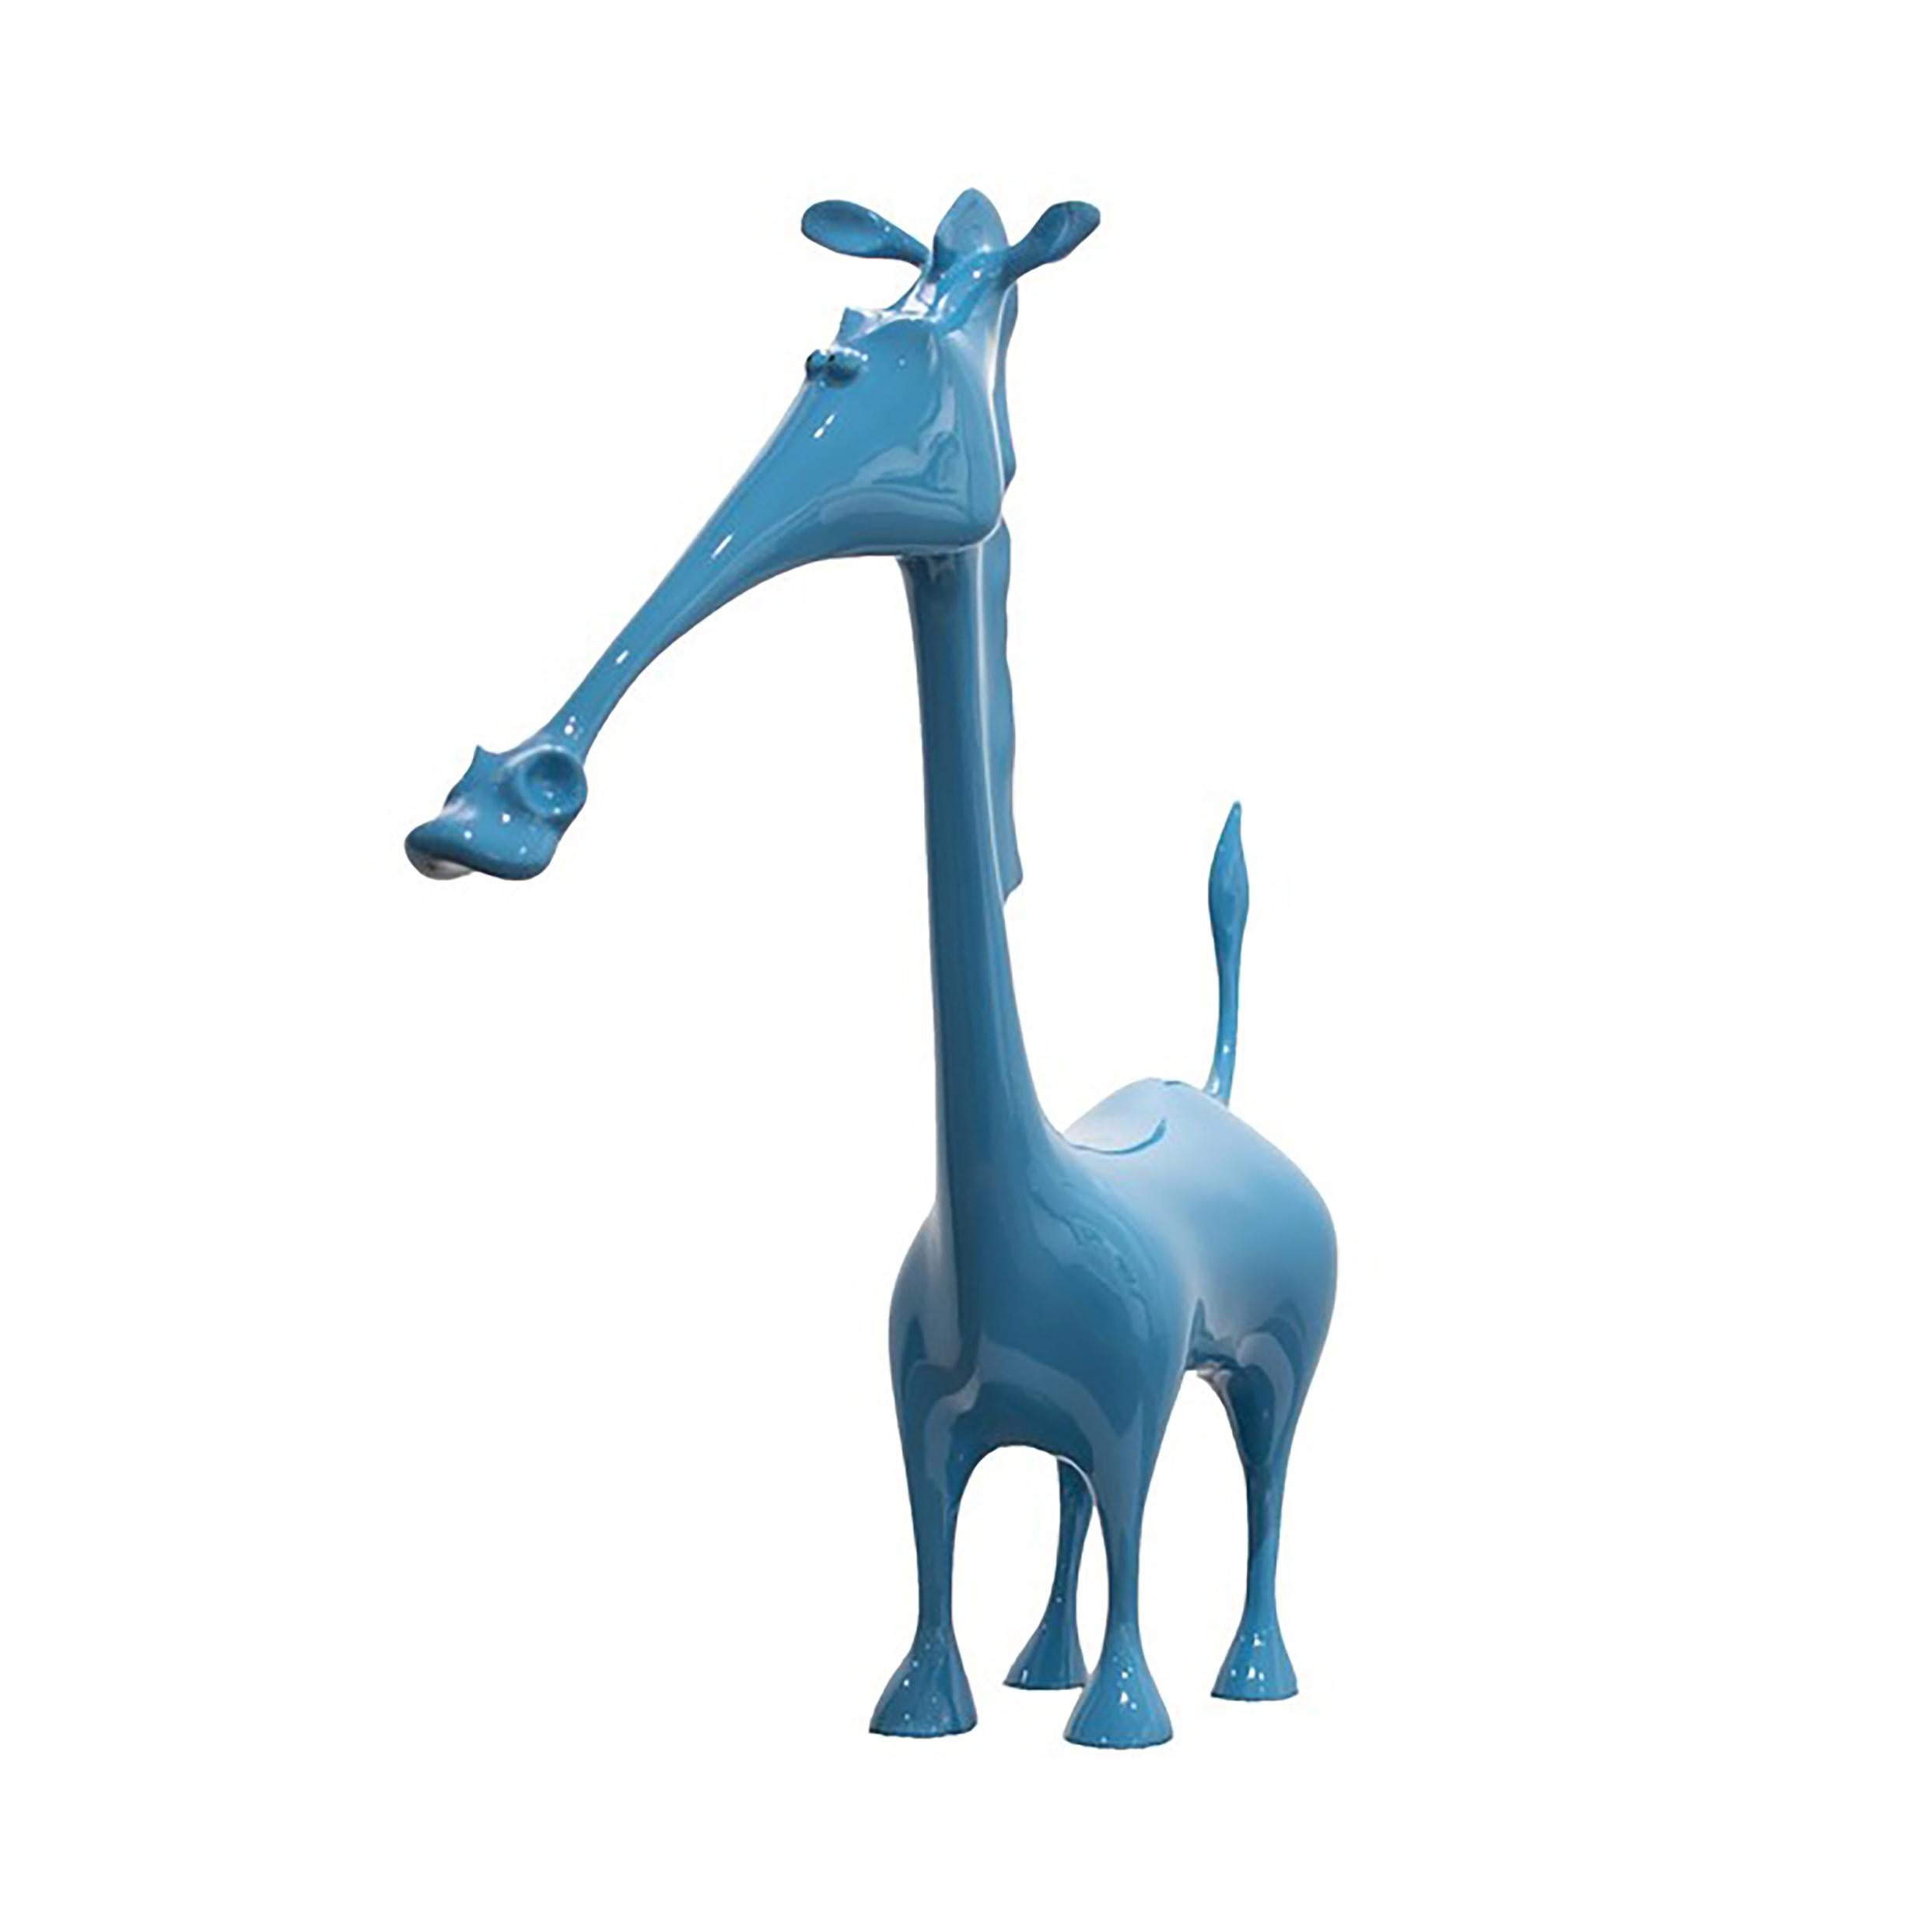 Horse Sculpture in Blue. Temporarily sold out. Pre-order is available.